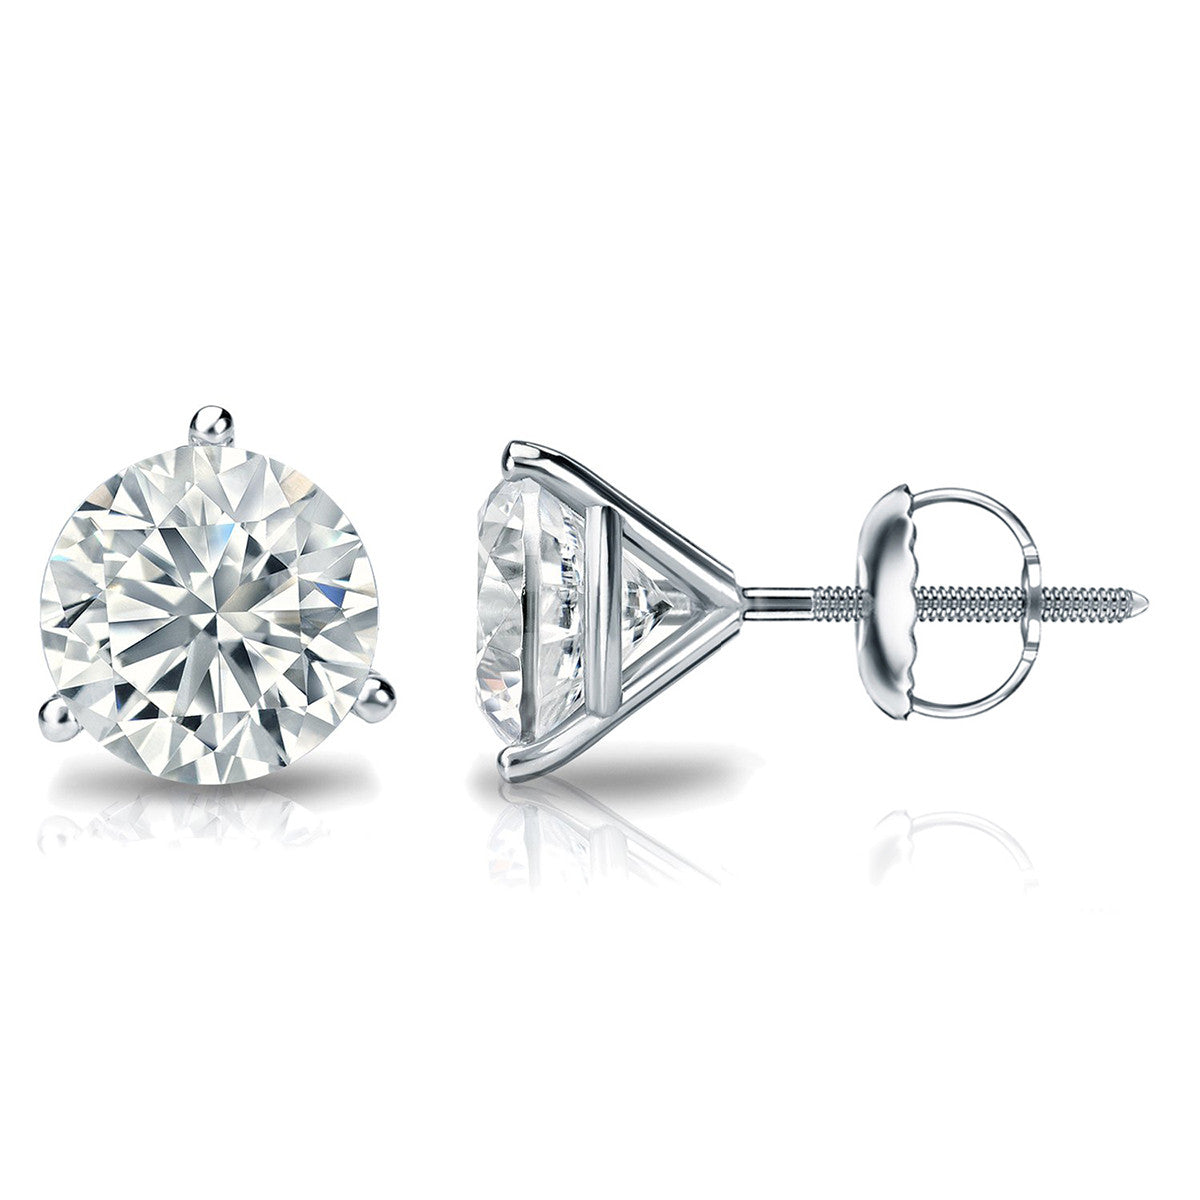 2 Carat Round 14K White Gold 3 Prong Martini Set Diamond Solitaire Stud Earrings (Classic Quality)